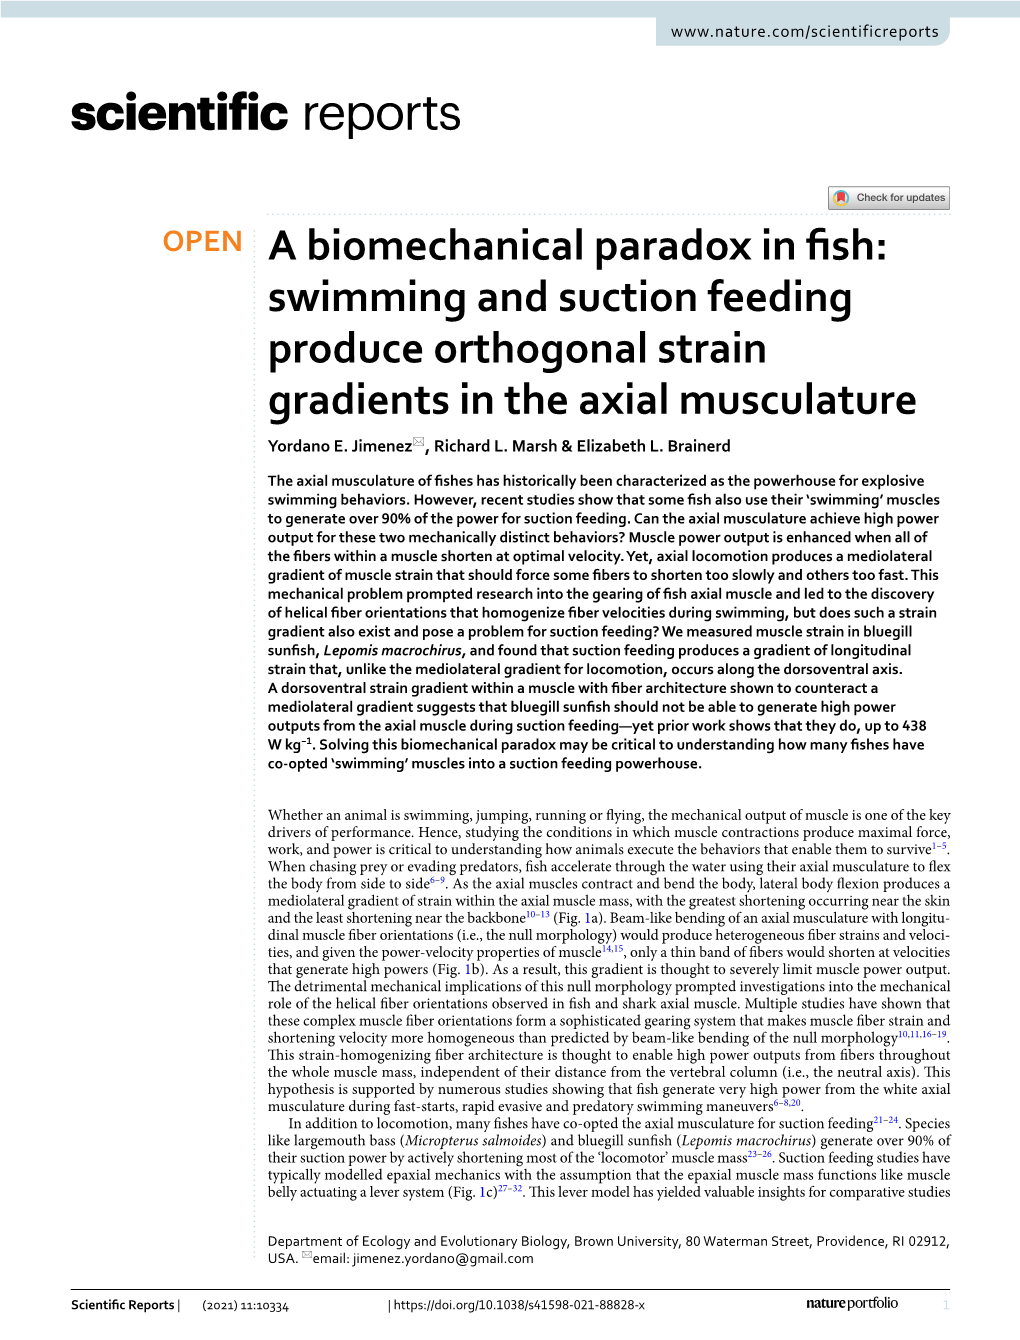 Swimming and Suction Feeding Produce Orthogonal Strain Gradients in the Axial Musculature Yordano E